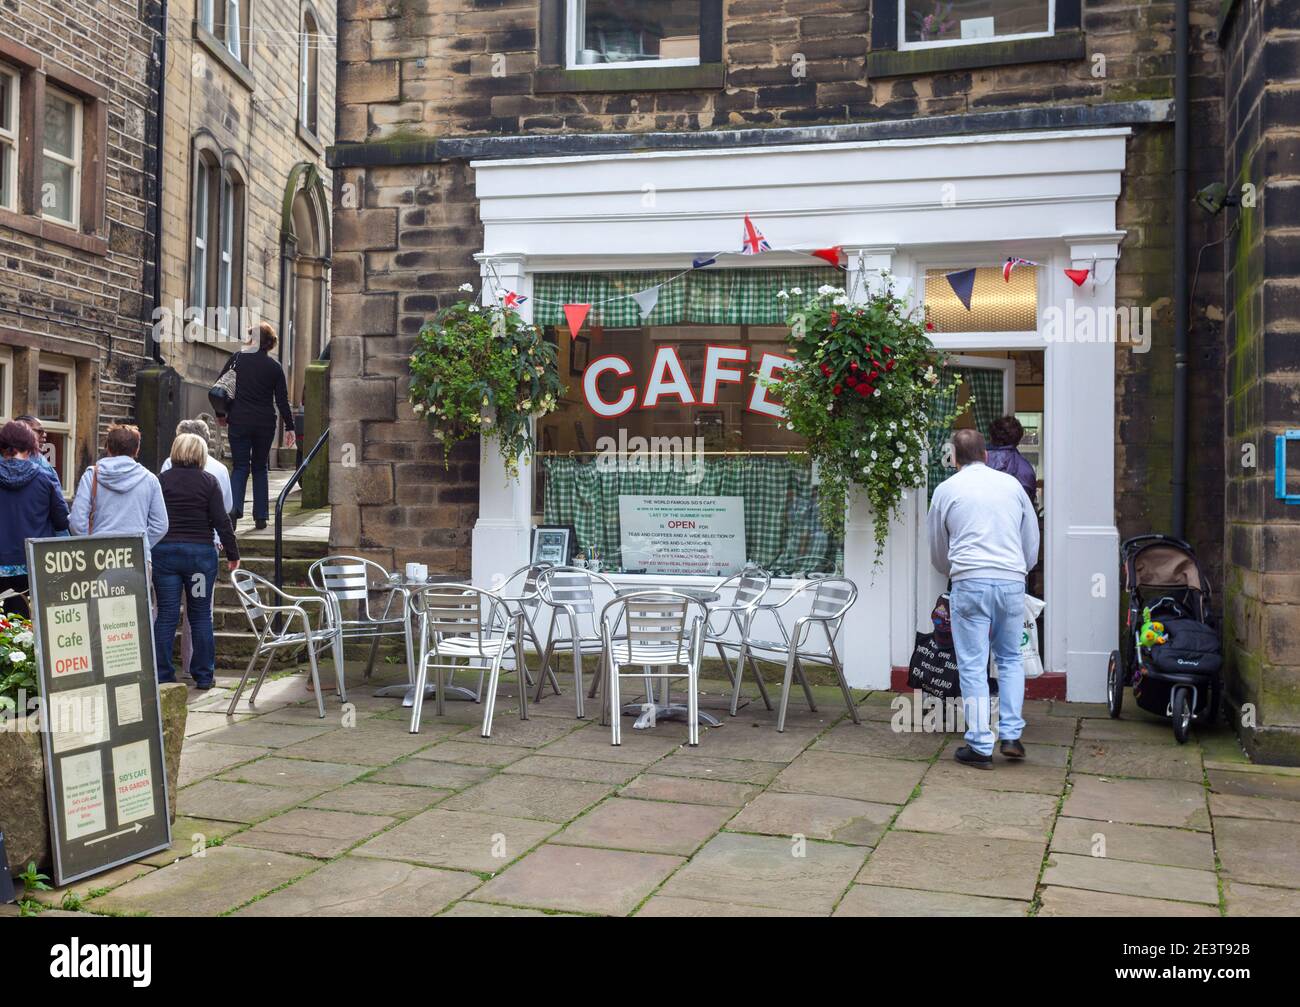 SID's Cafe on Towngate, Holmfirth, West Yorkshire - un luogo chiave per le riprese della serie televisiva The Last of the Summer Wine Foto Stock